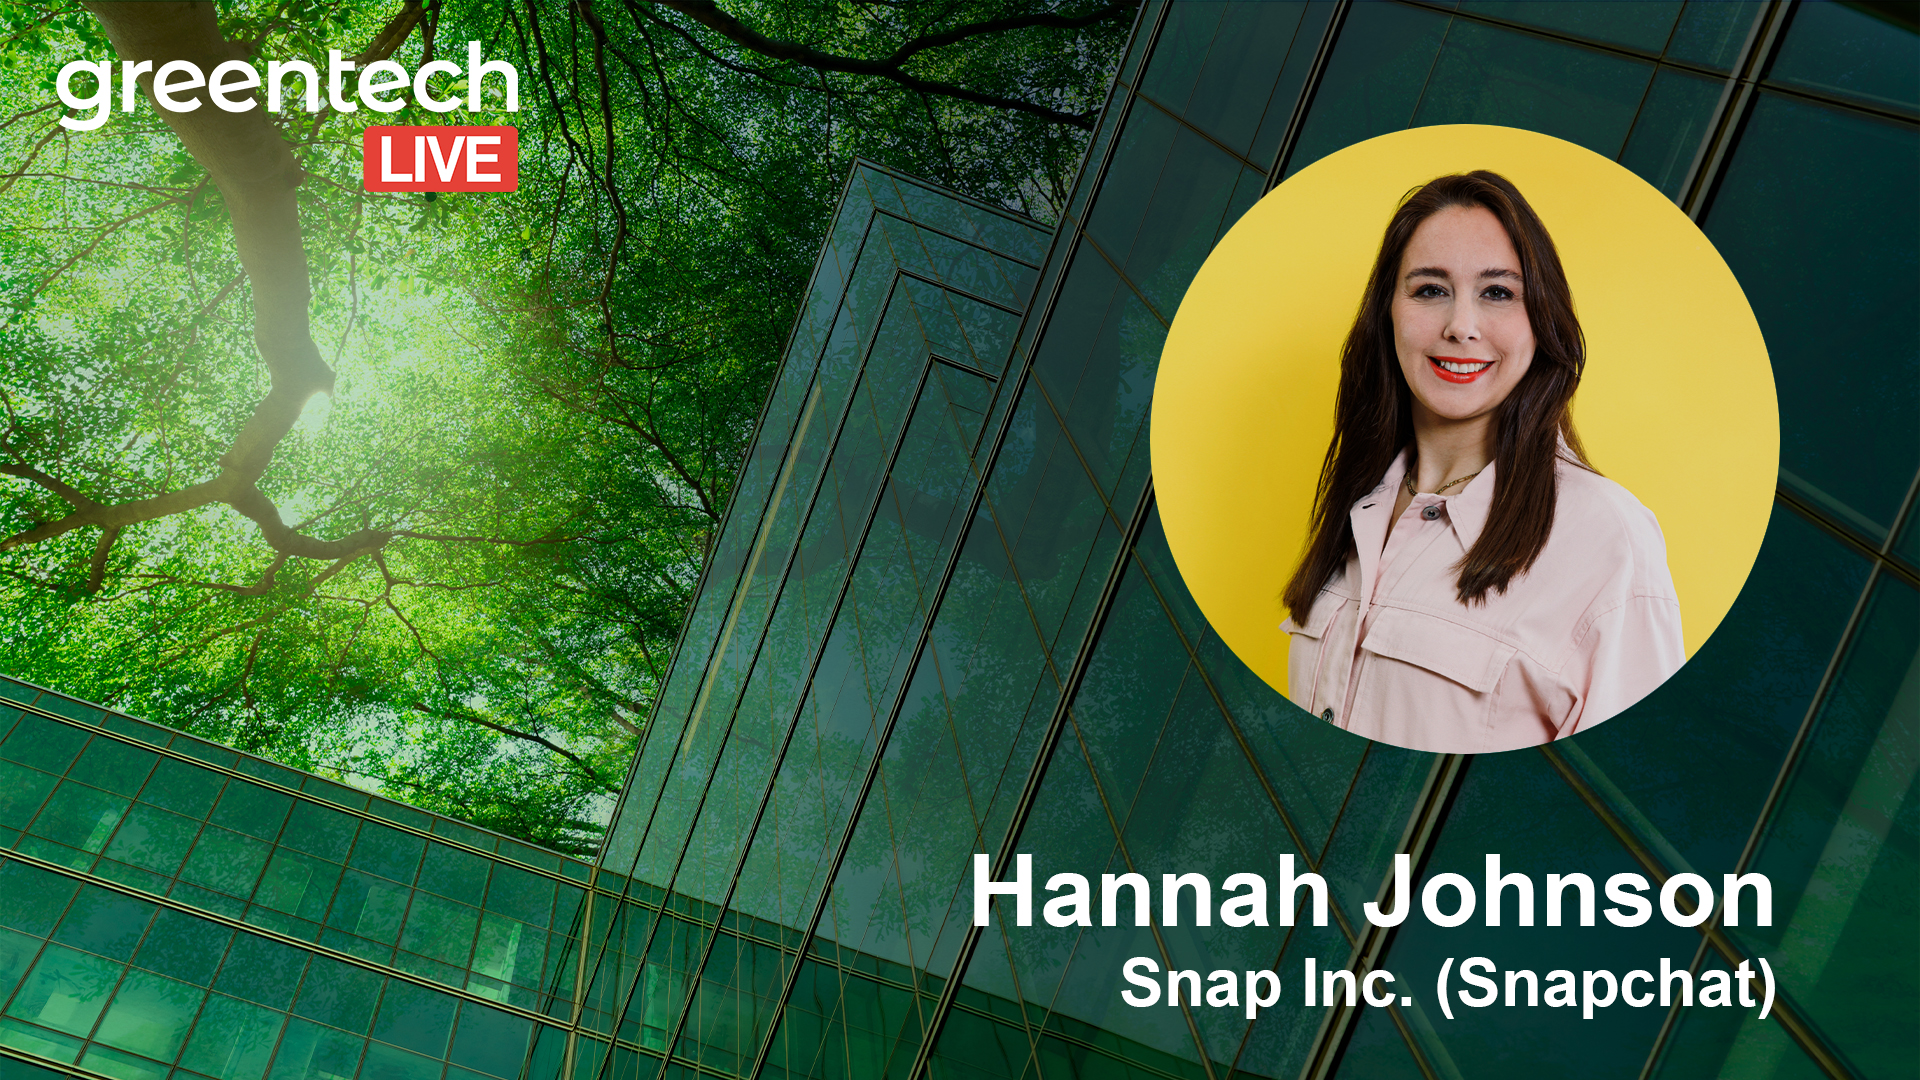 Greentech Live Congress with Hannah Johnson from Snapchat